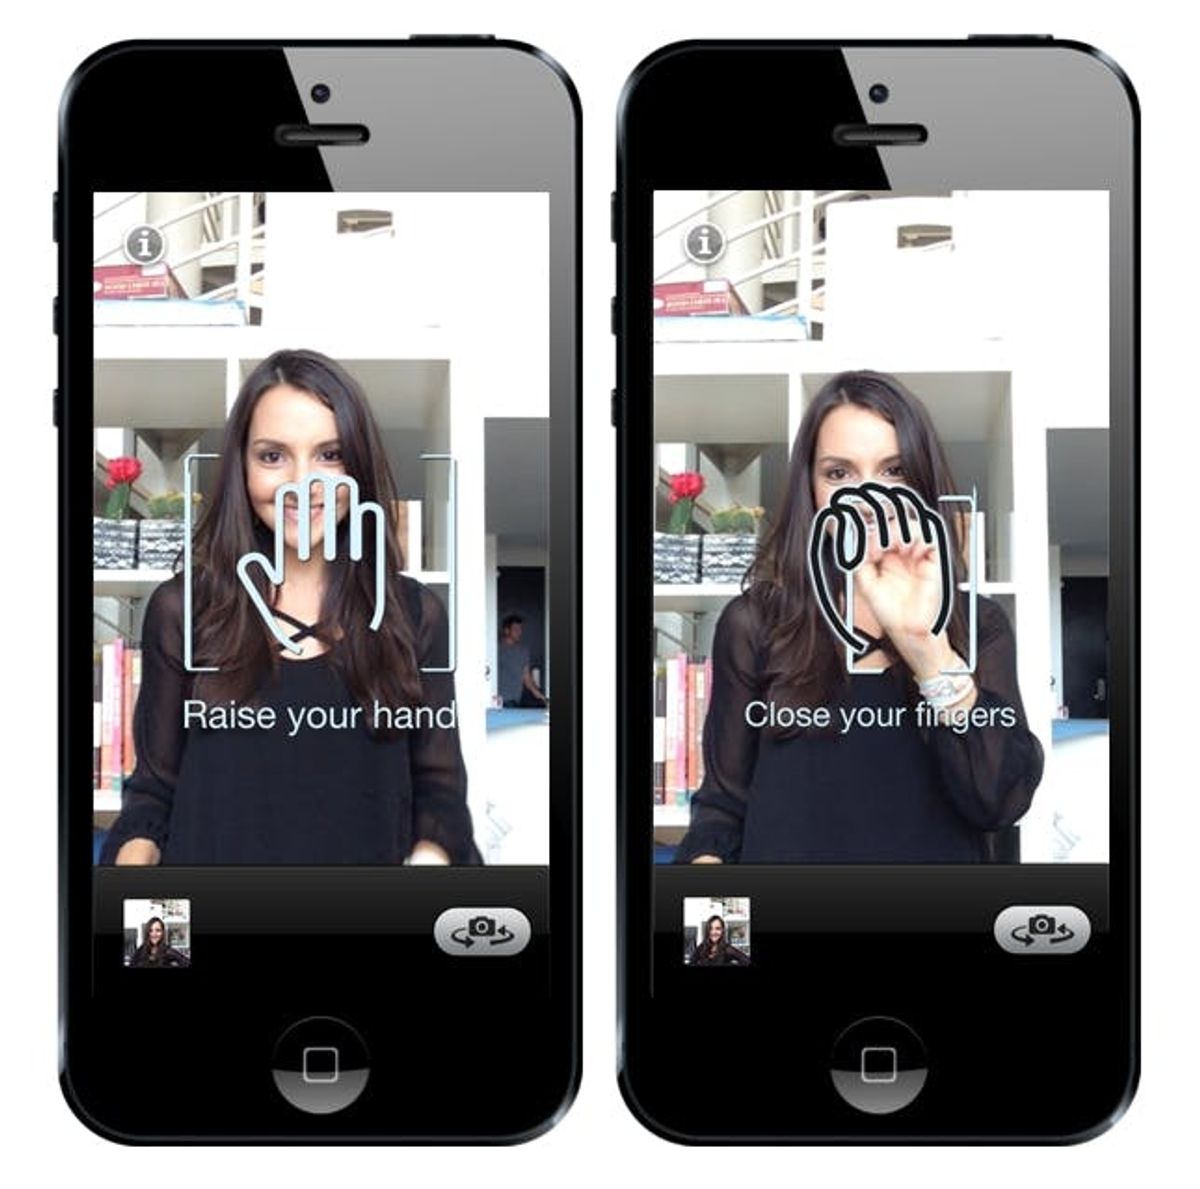 CamMe, the New App for Taking Better Selfies